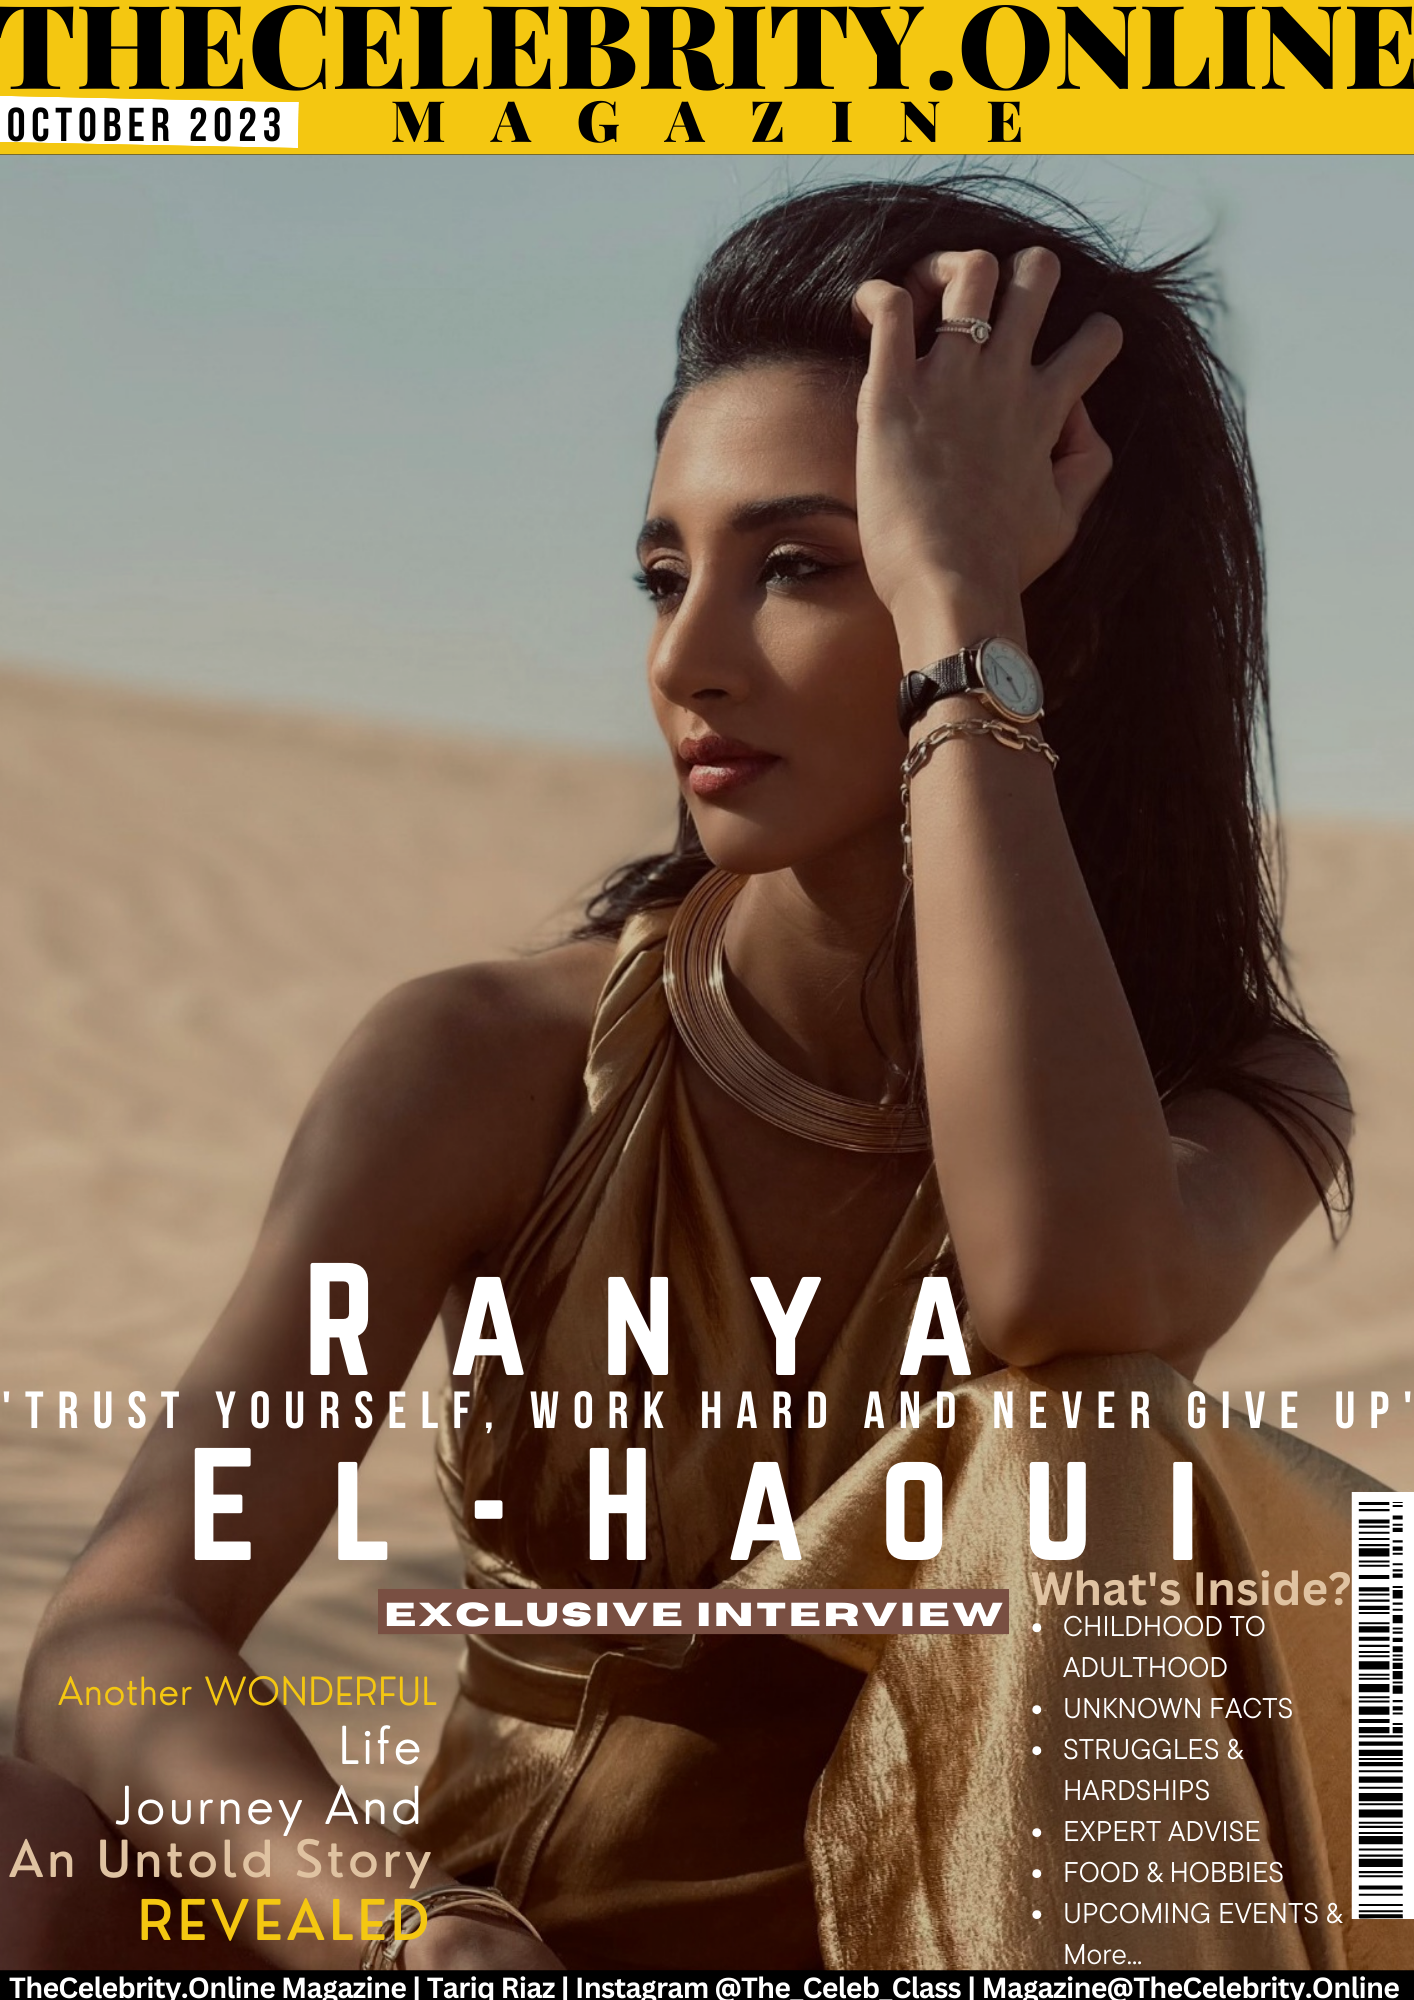 Ranya El-Haoui Exclusive Interview – ‘Trust Yourself, Work Hard And Never Give Up’